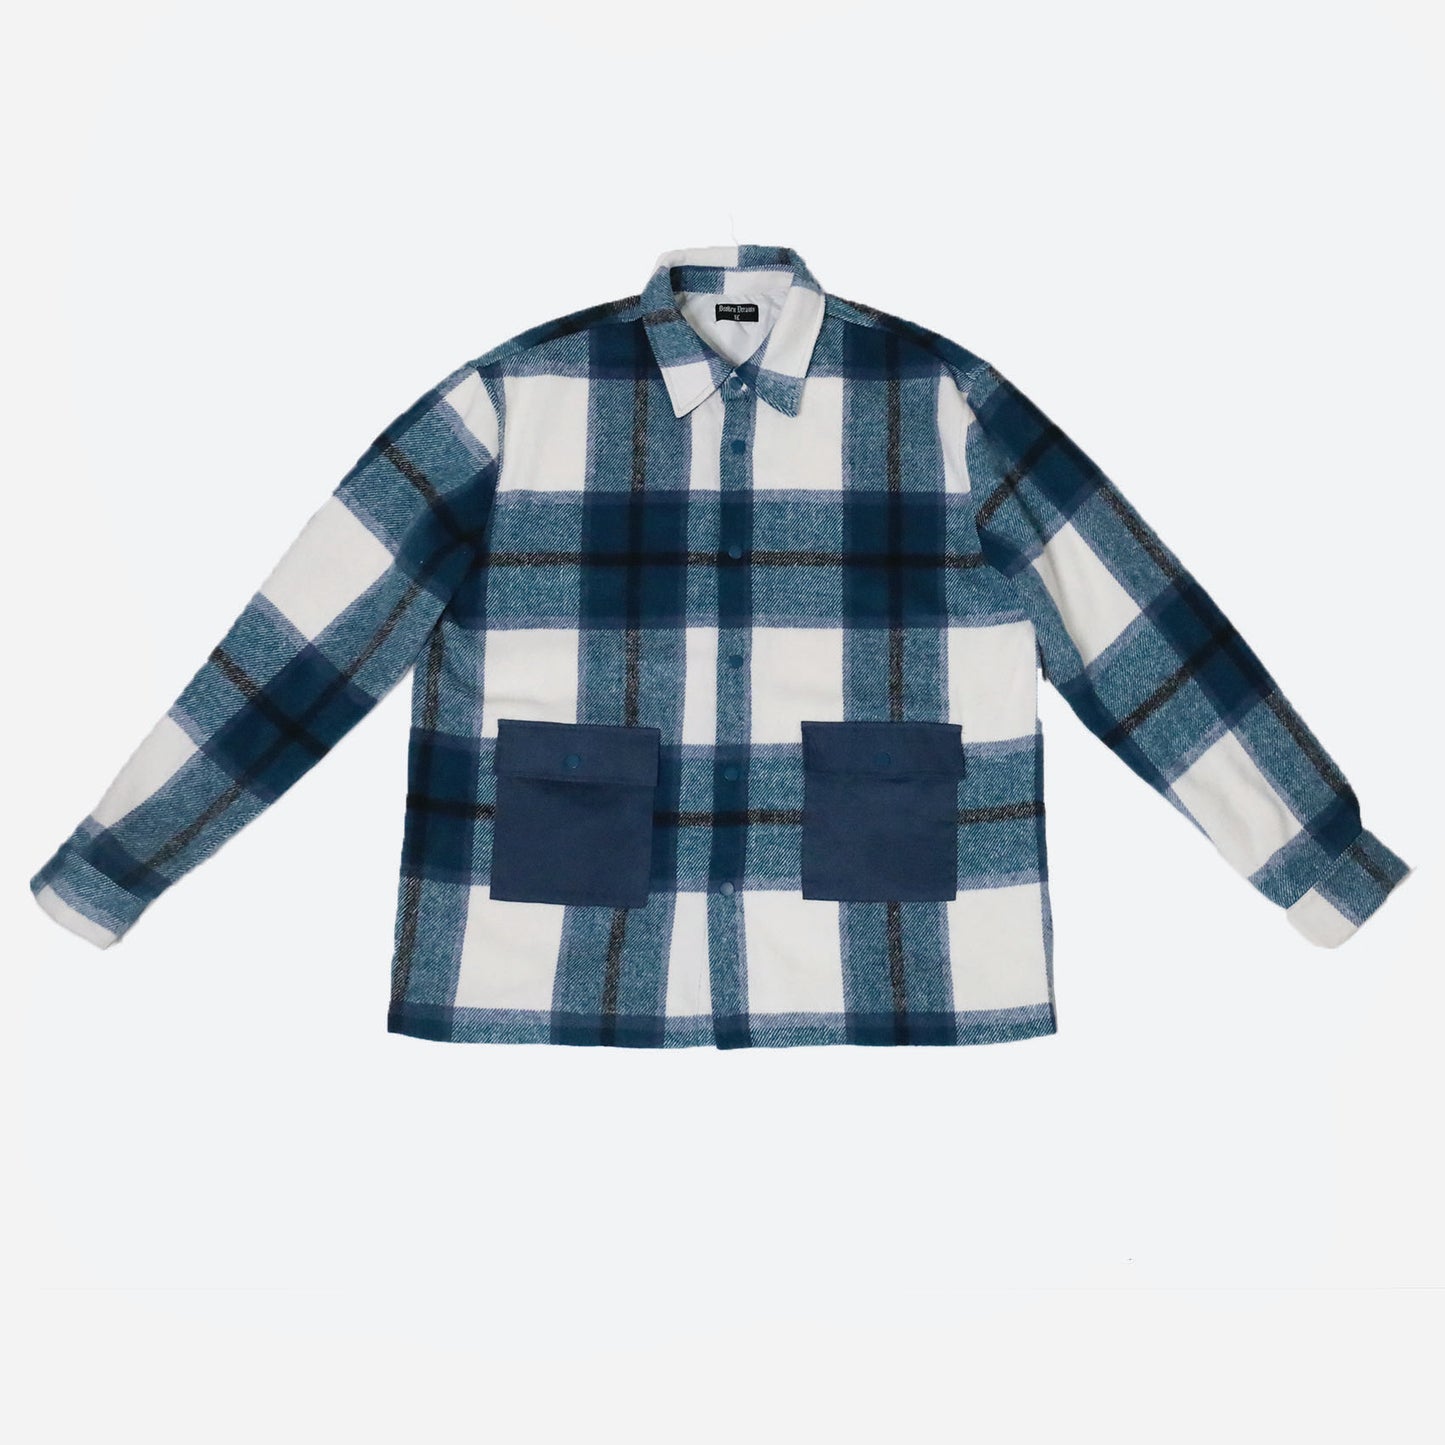 Dreams Arch Flannel Navy Blue/White